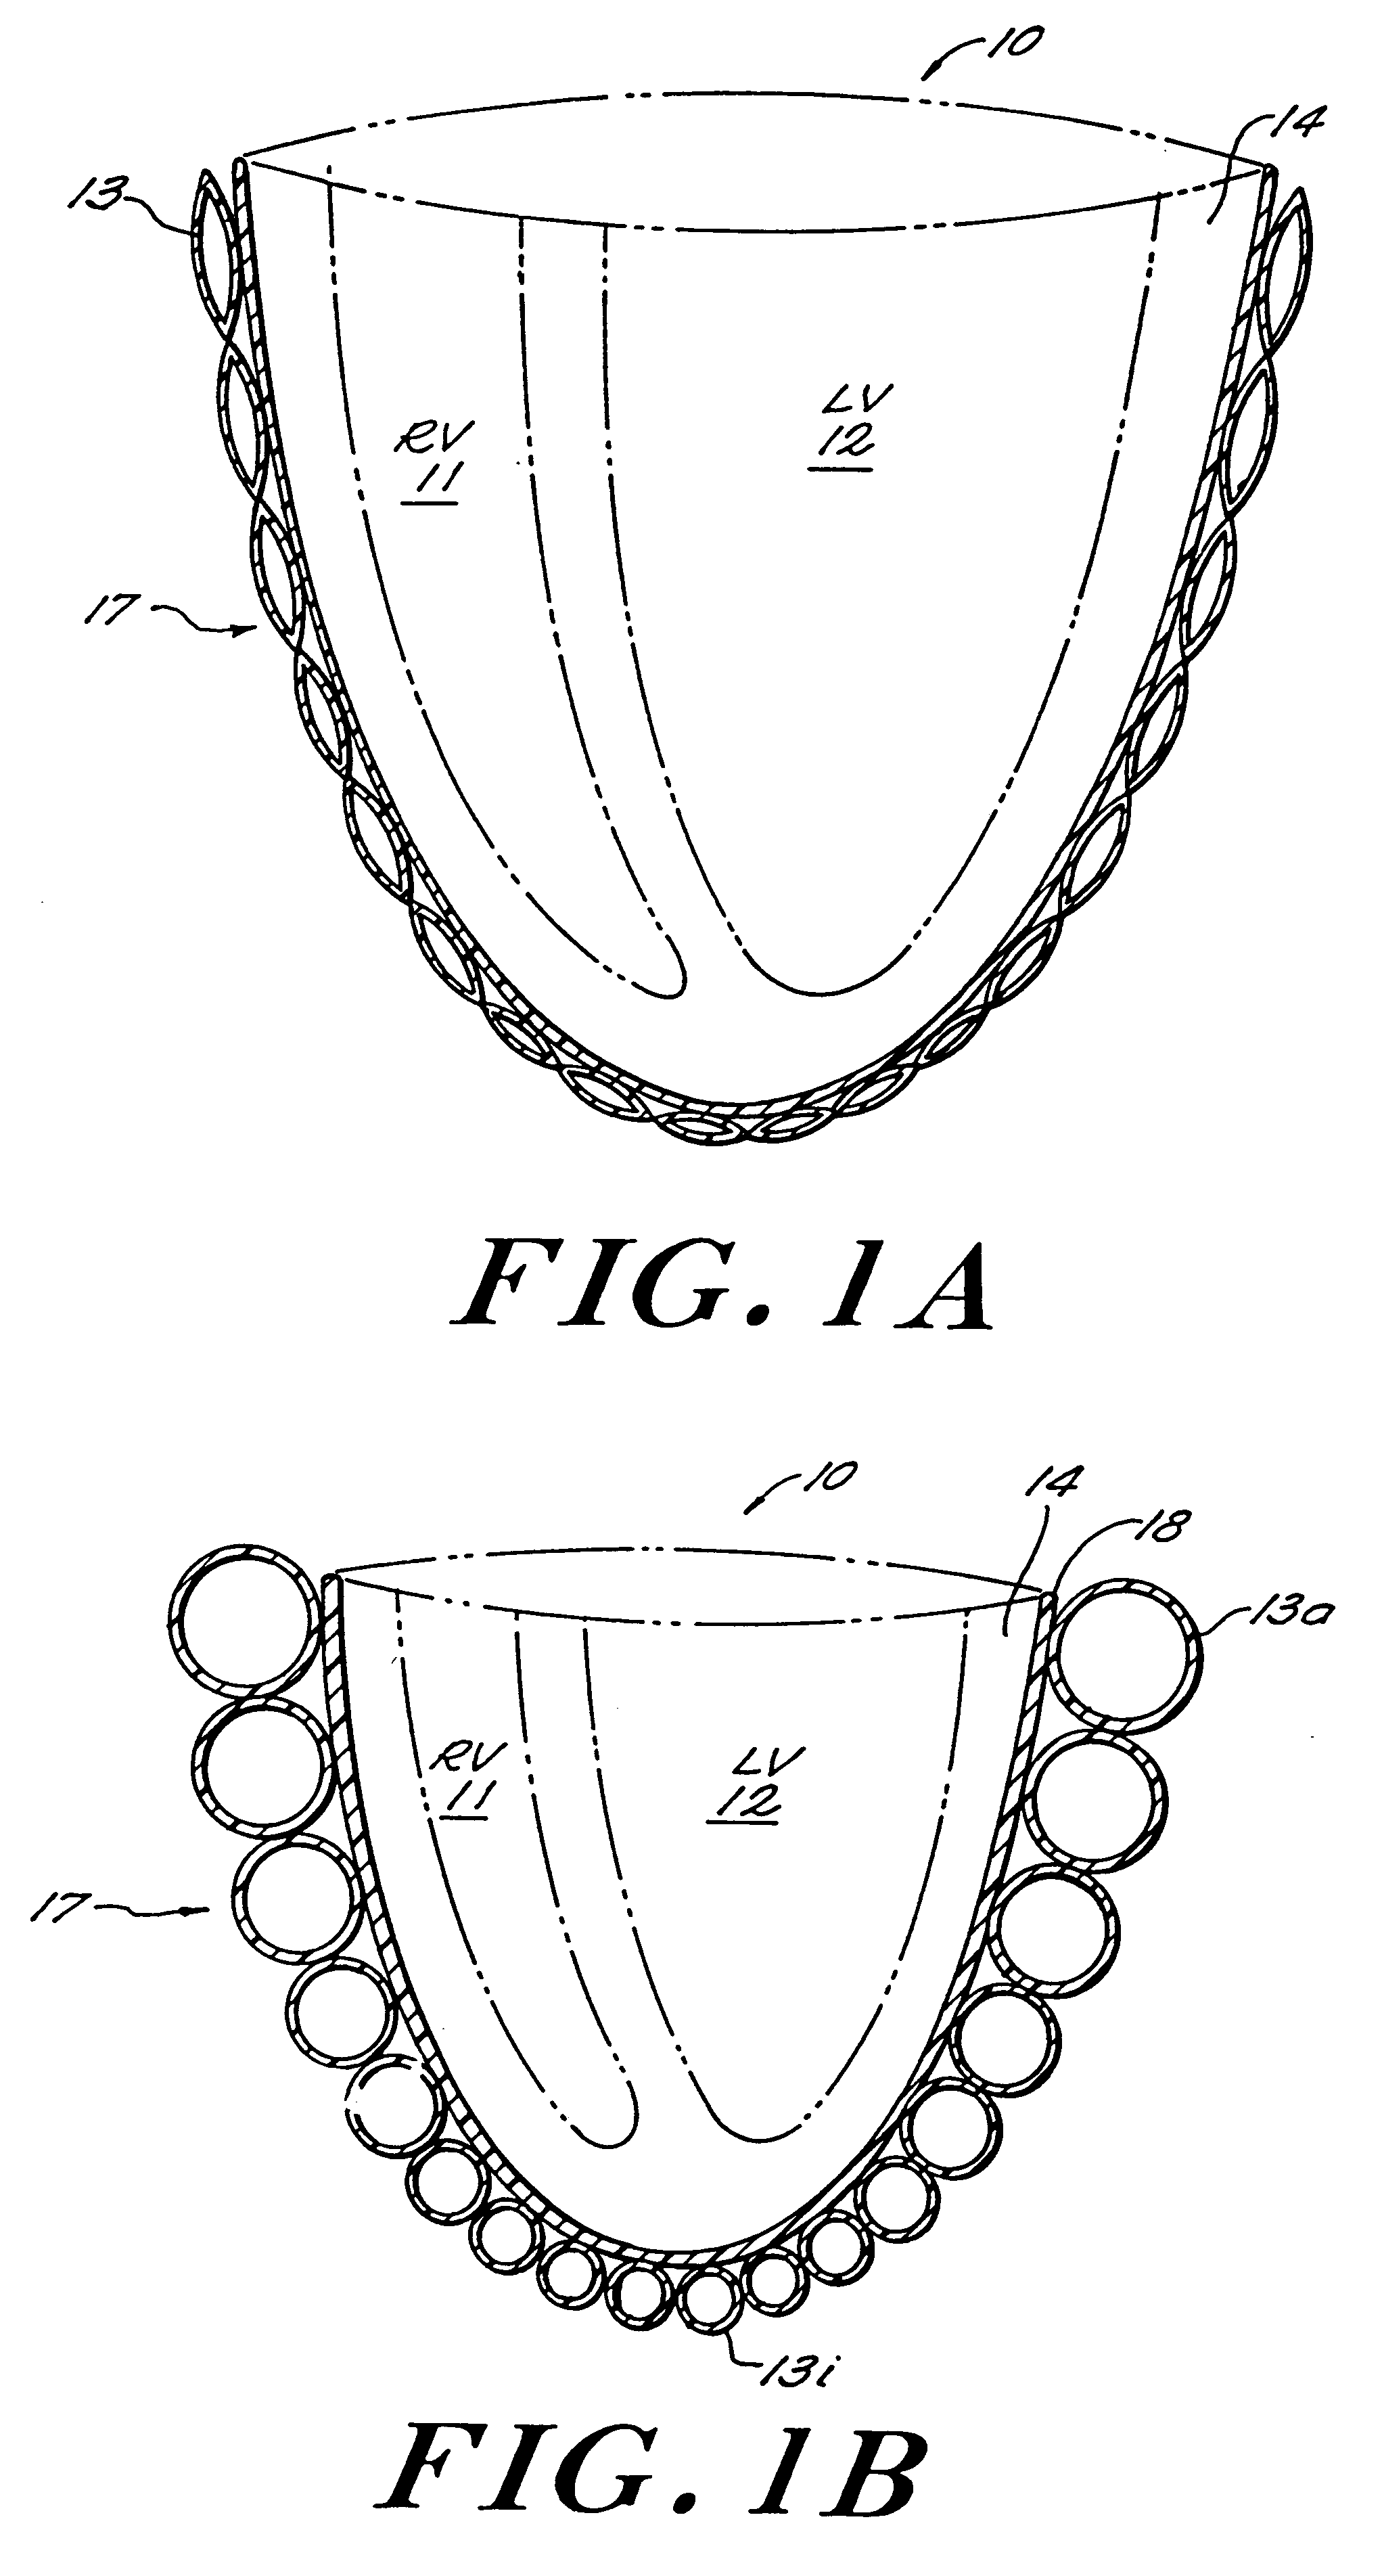 Passive girdle for heart ventricle for therapeutic aid to patients having ventricular dilatation